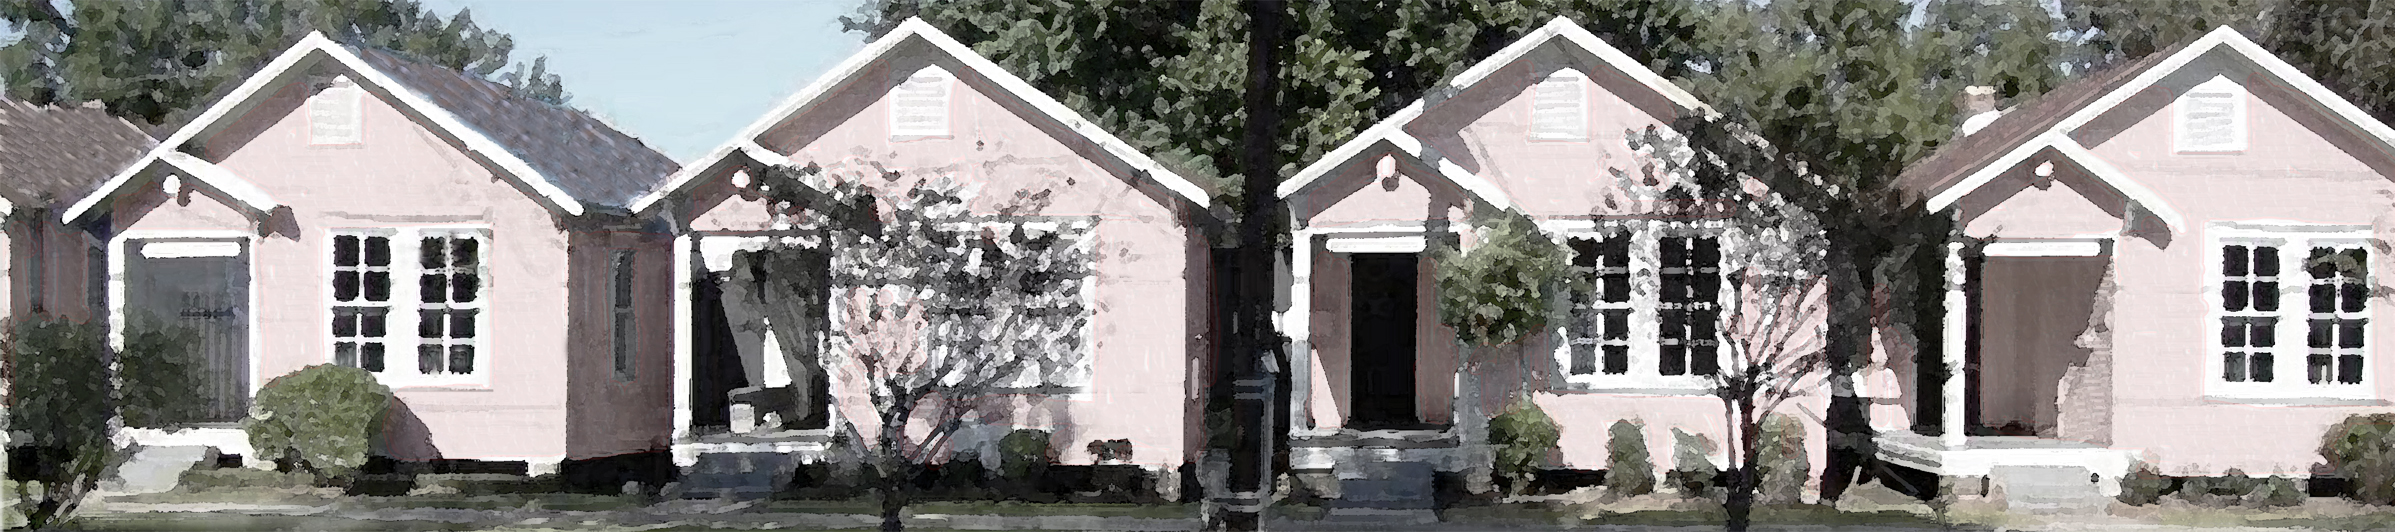 Image: A row of pink houses